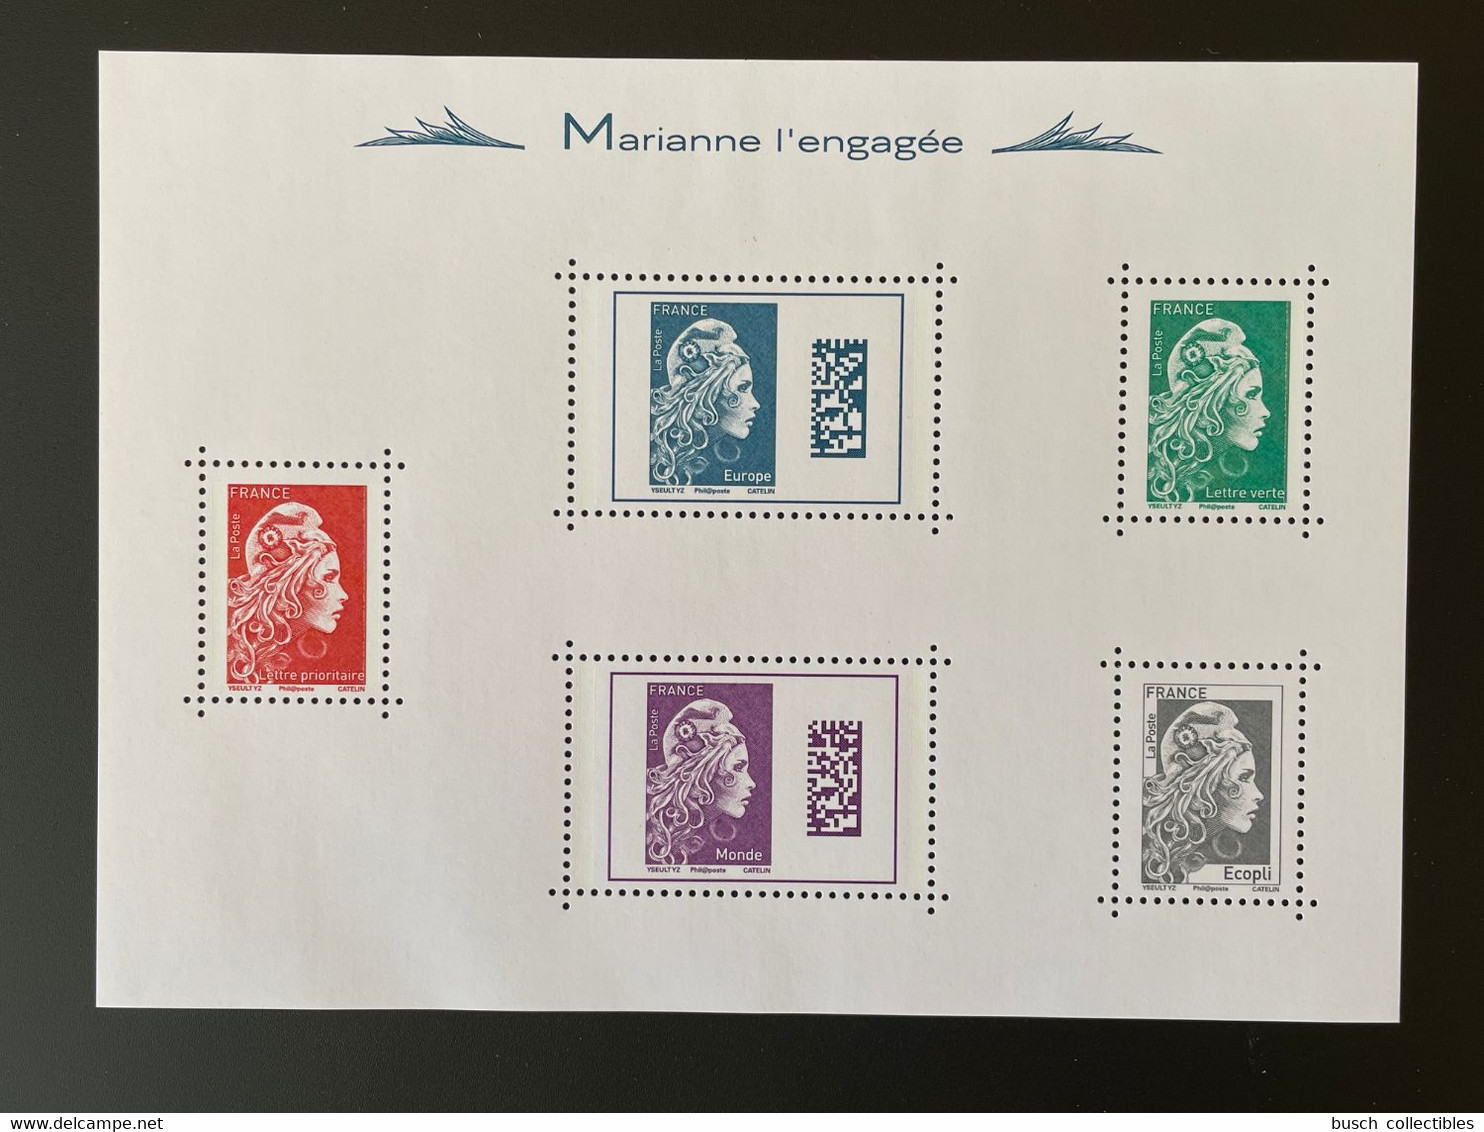 France 2018 - Bloc-feuillet BF YT N°143 Marianne L'engagée Yz - Mint/Hinged